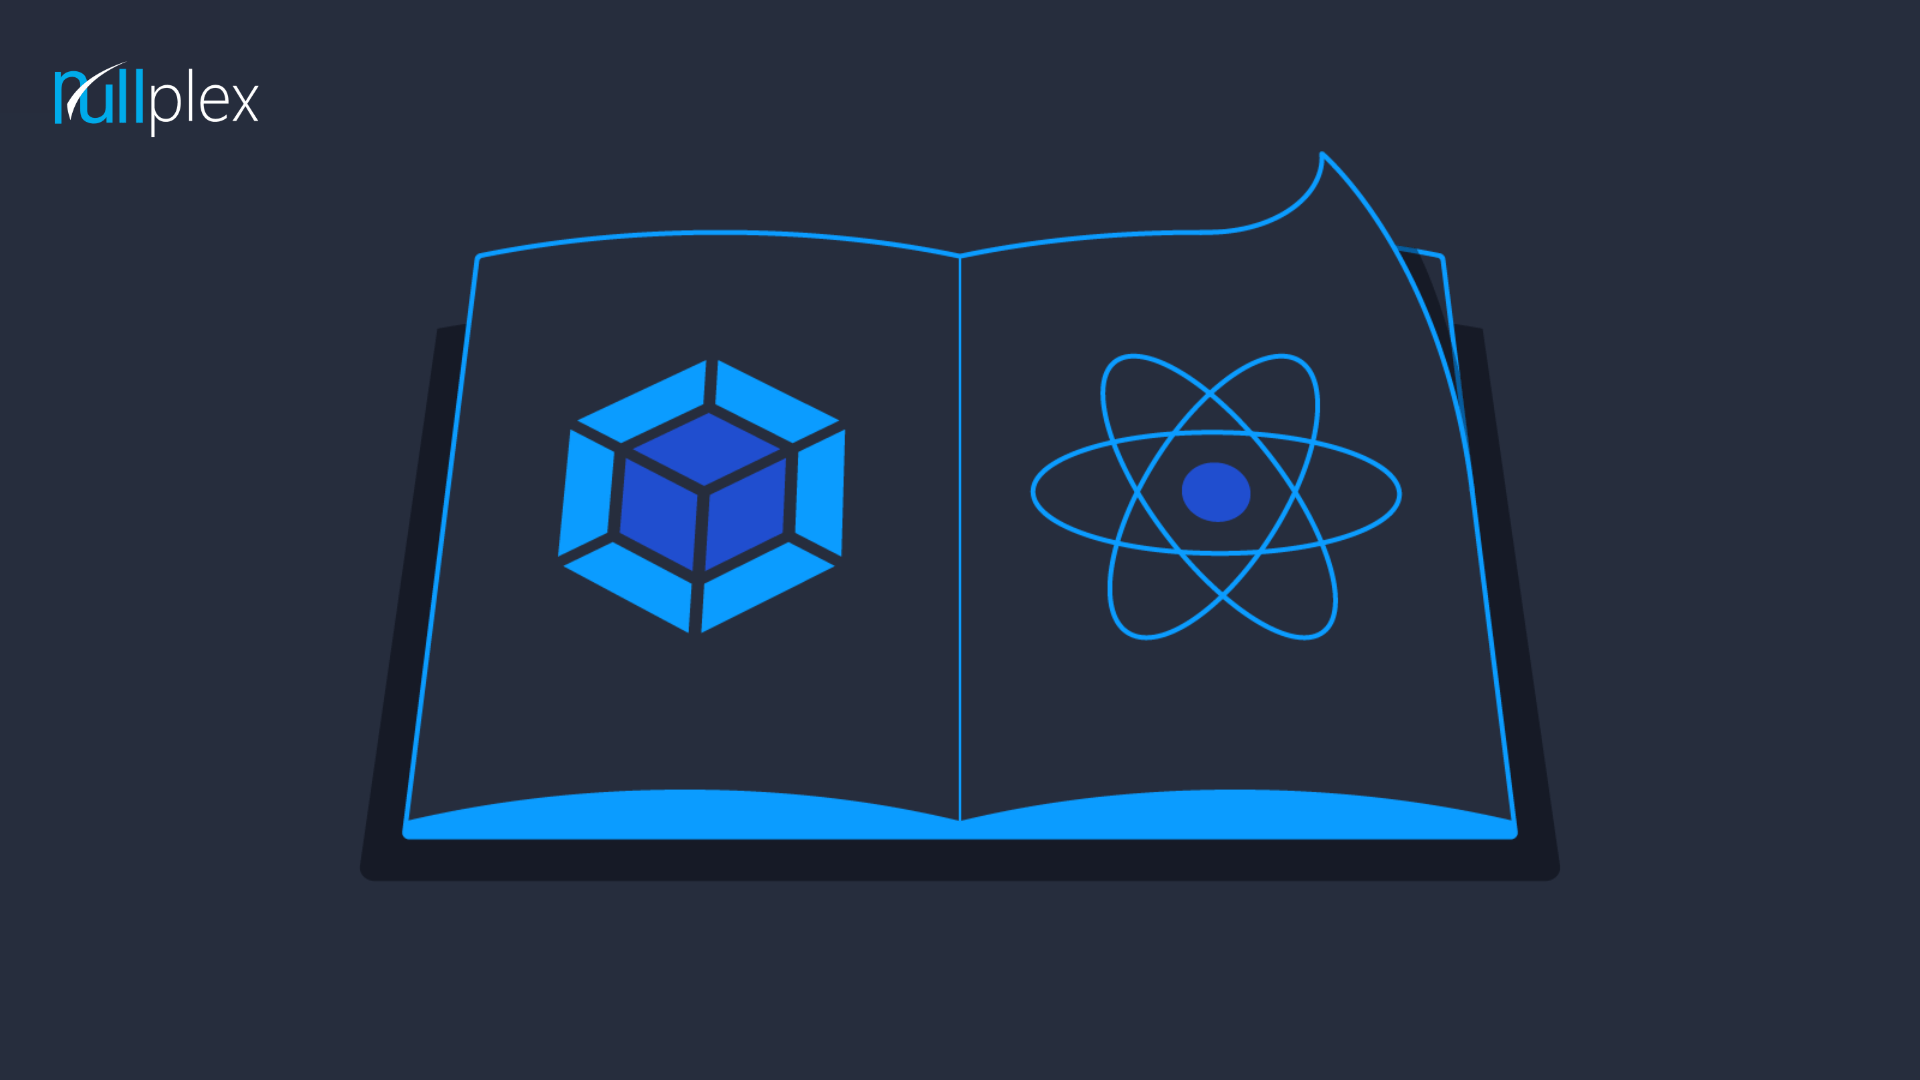 How to create a React App using Webpack from scratch | Nullplex